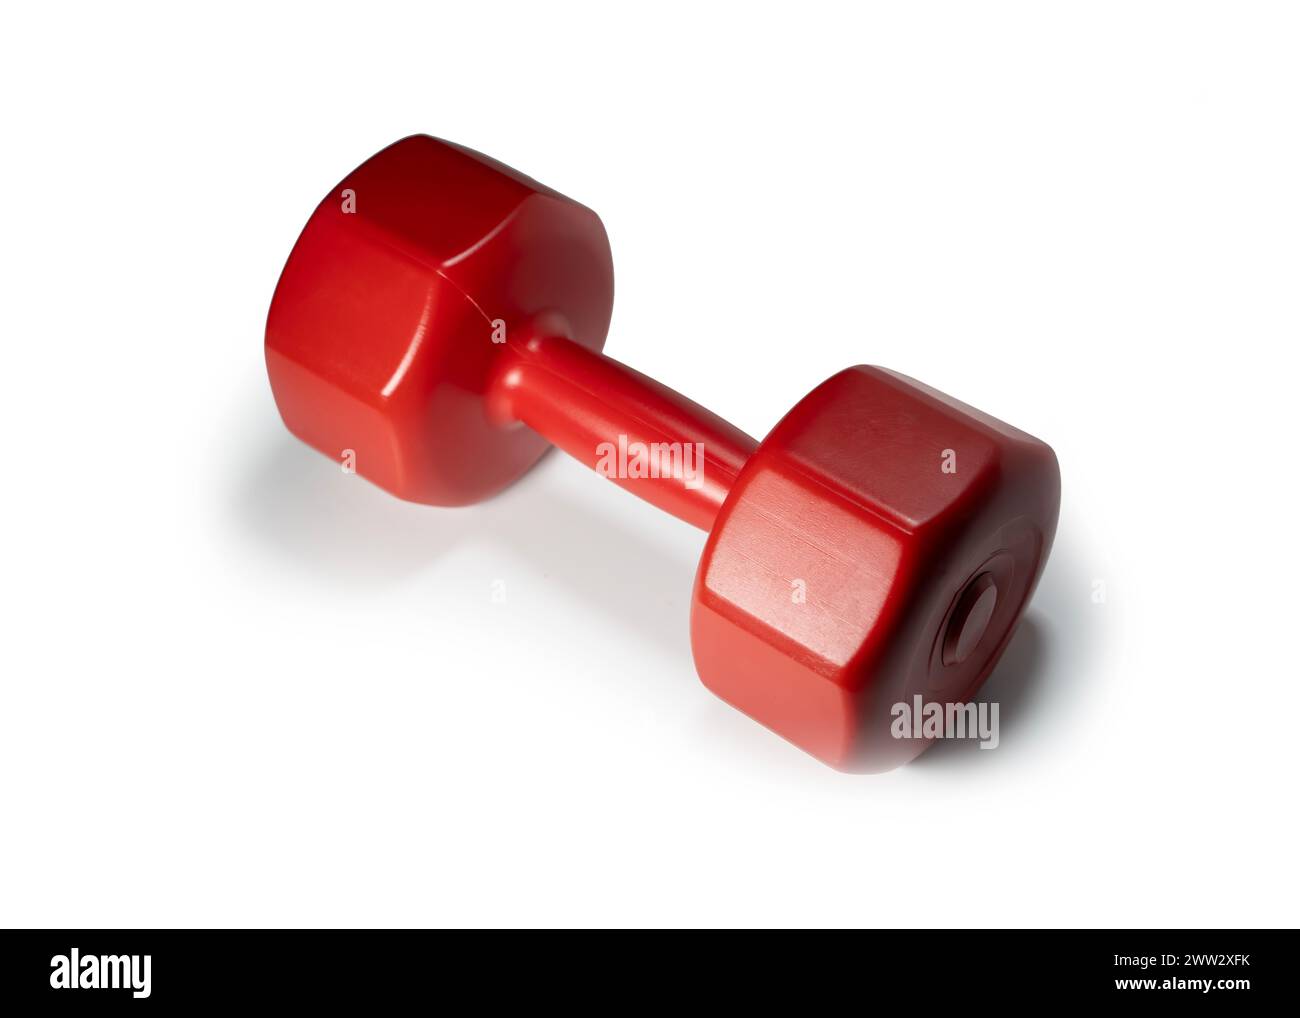 Red Plastic Dumbbell, Isolated On White Surface Stock Photo